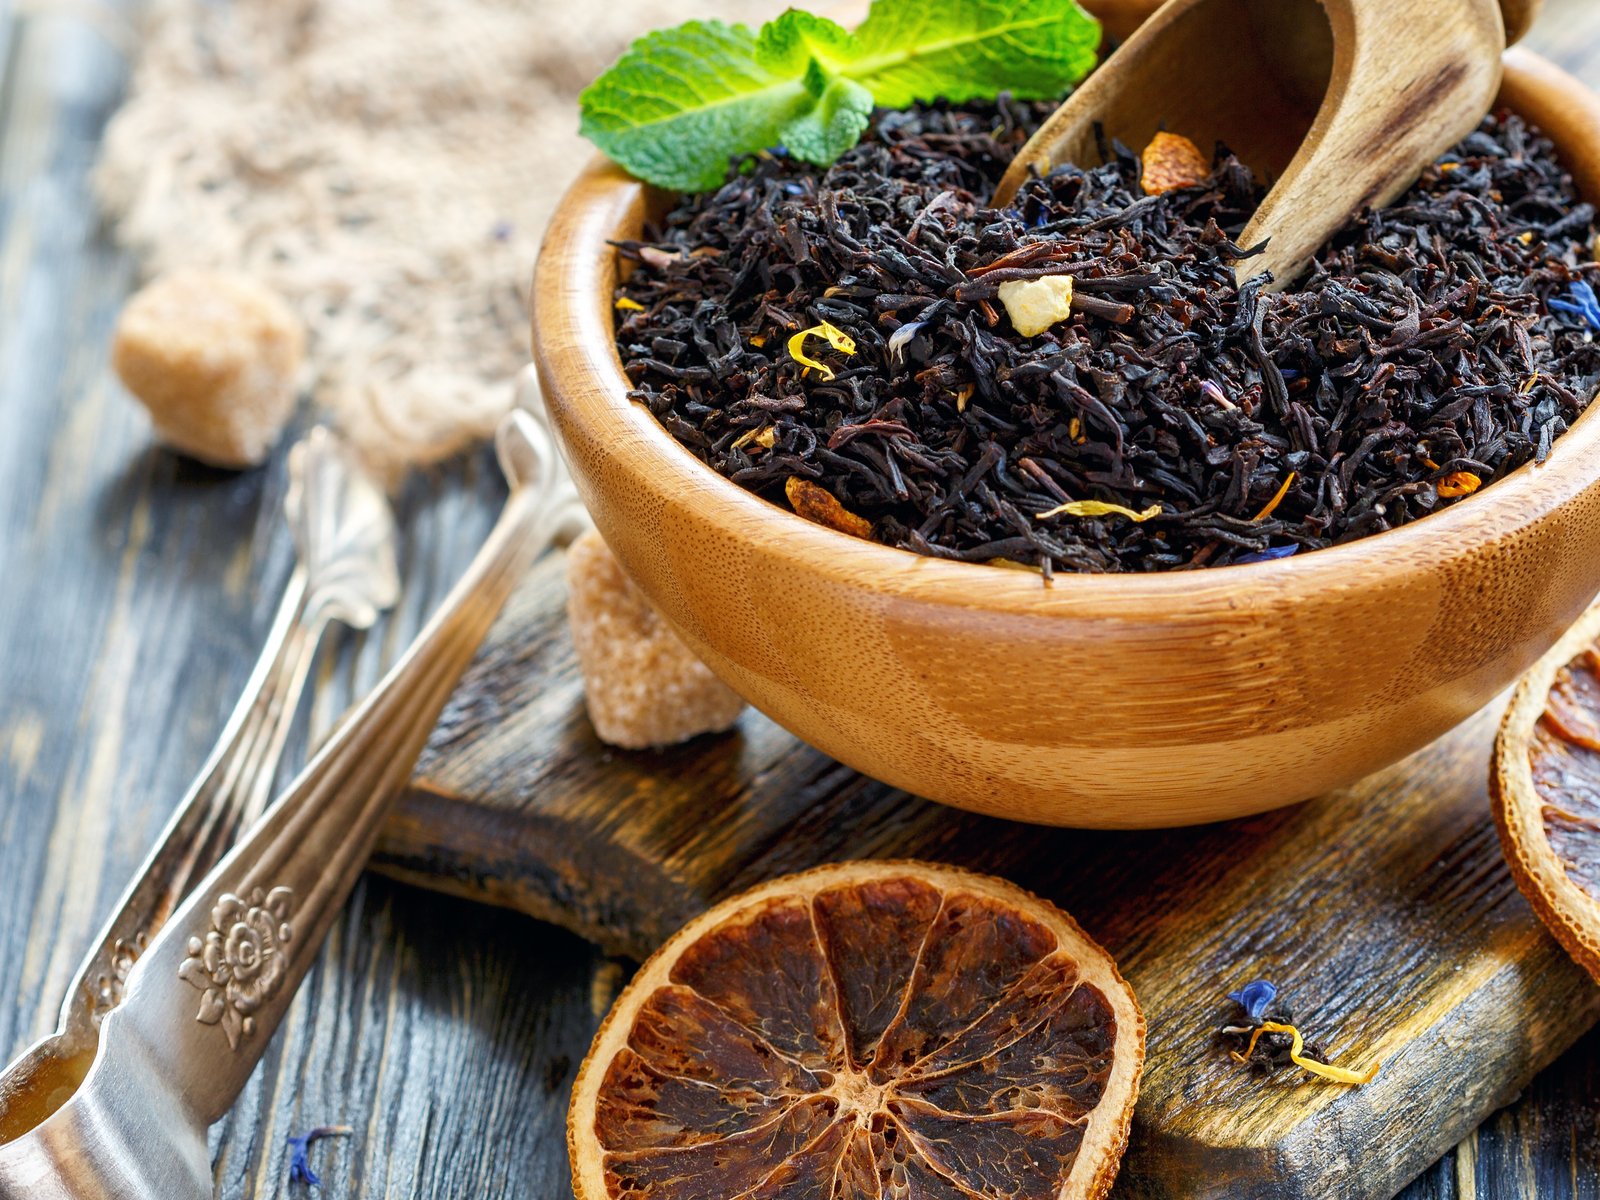 Earl Grey is made from black tea and&nbsp;bergamot&nbsp;citrus extract.